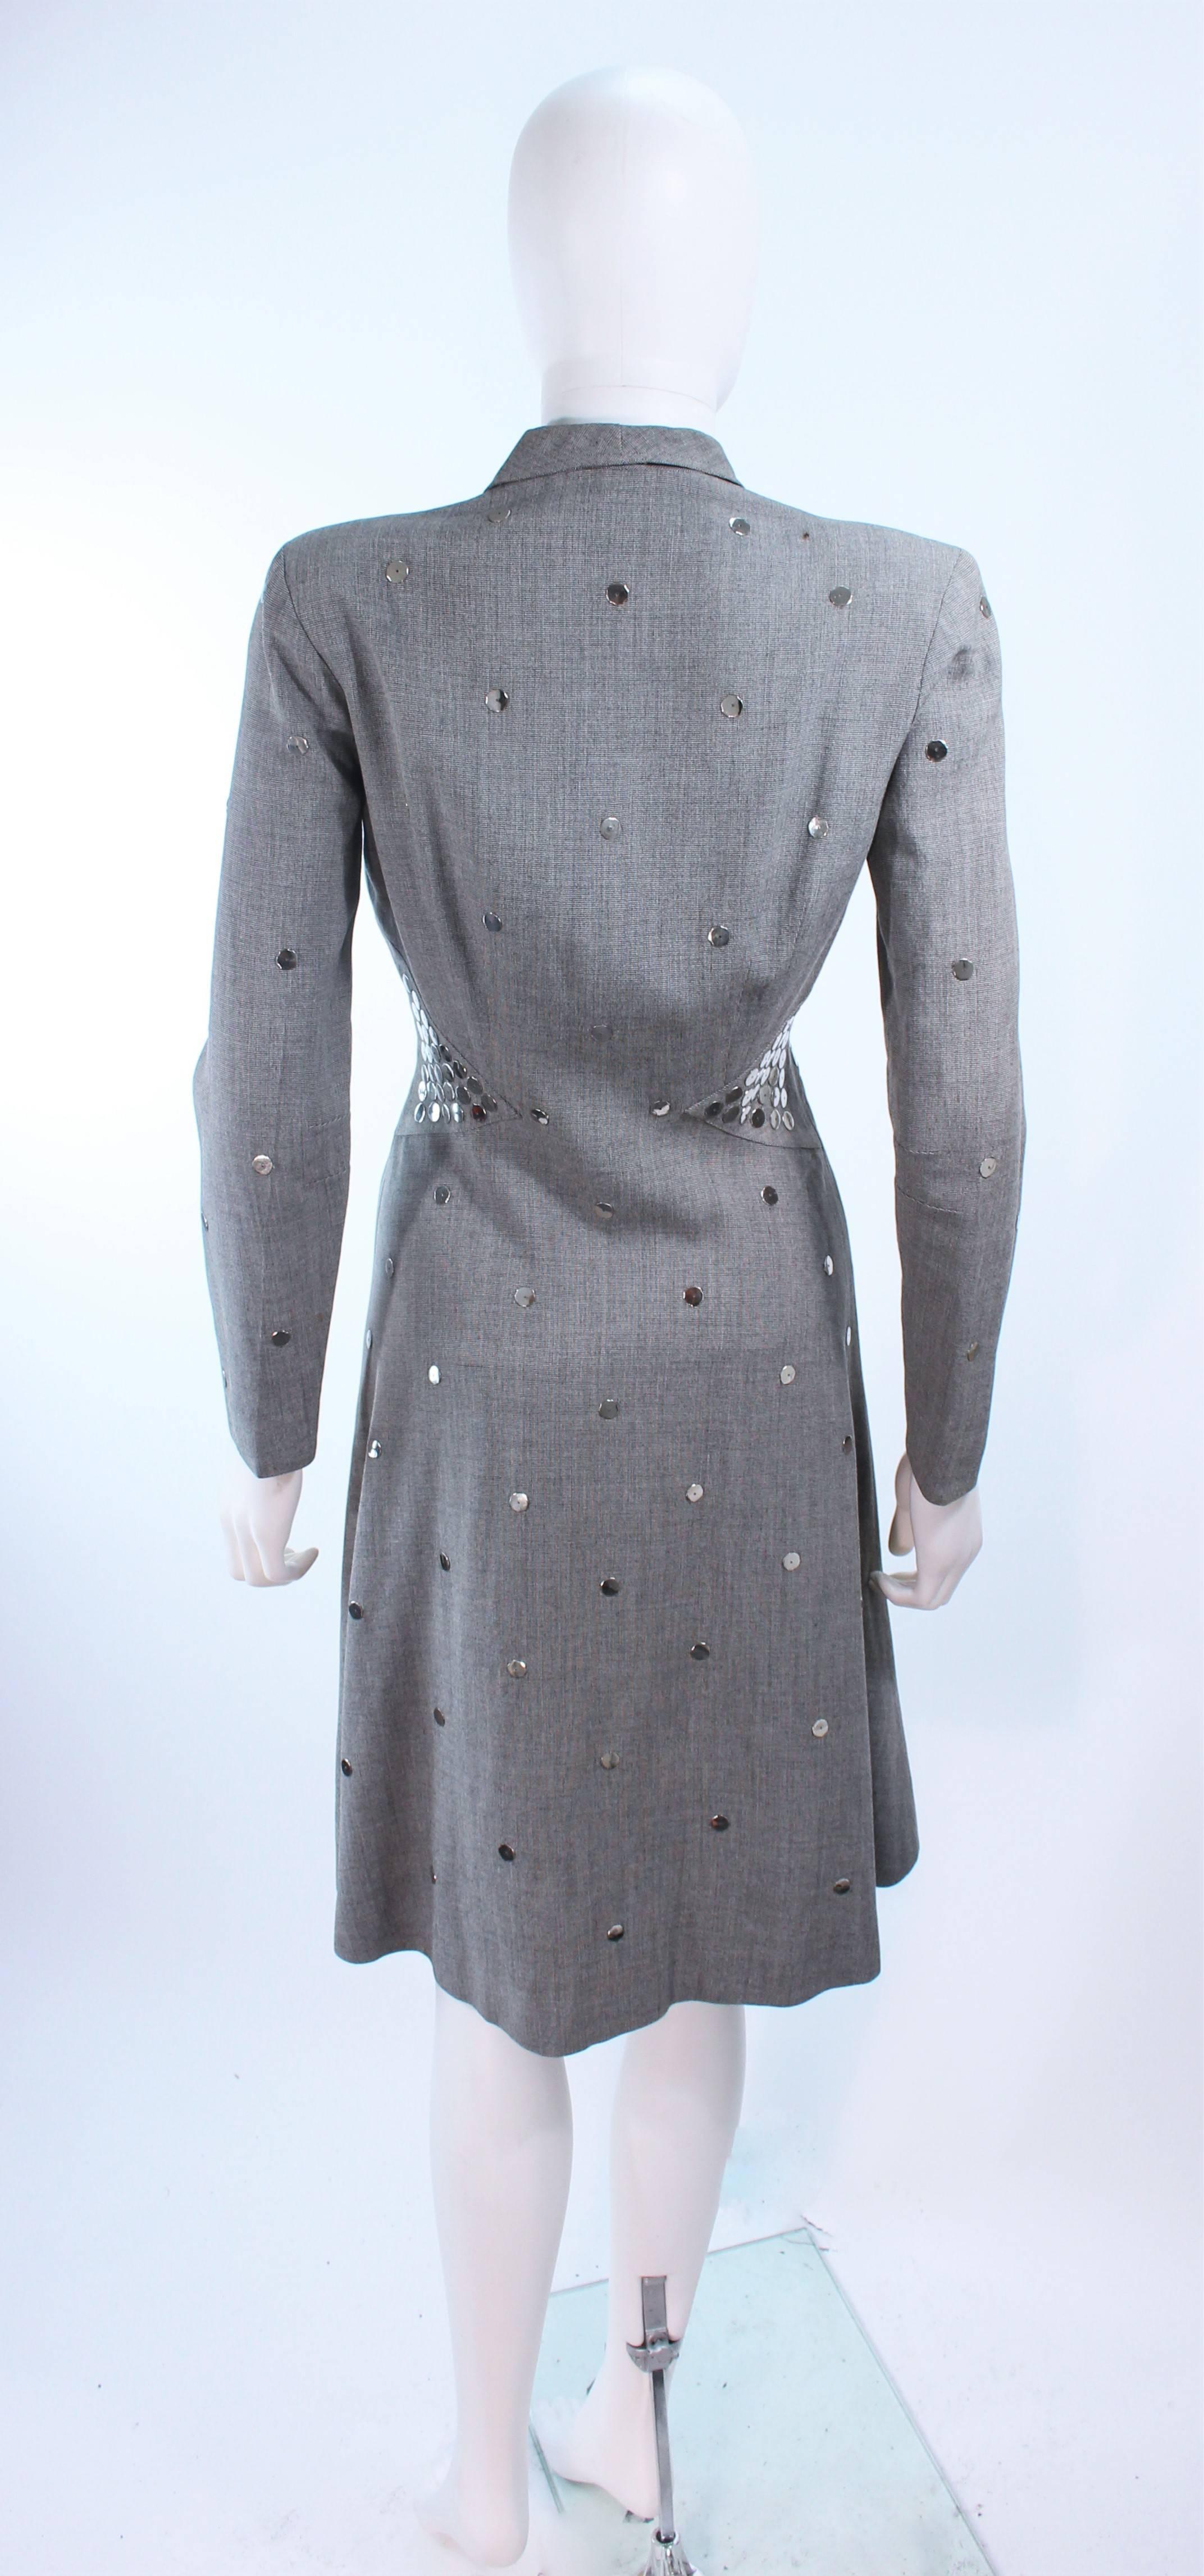 KAY COLLIER Grey Wool Coat Dress with Sequin Applique Size 2 4 For Sale 2